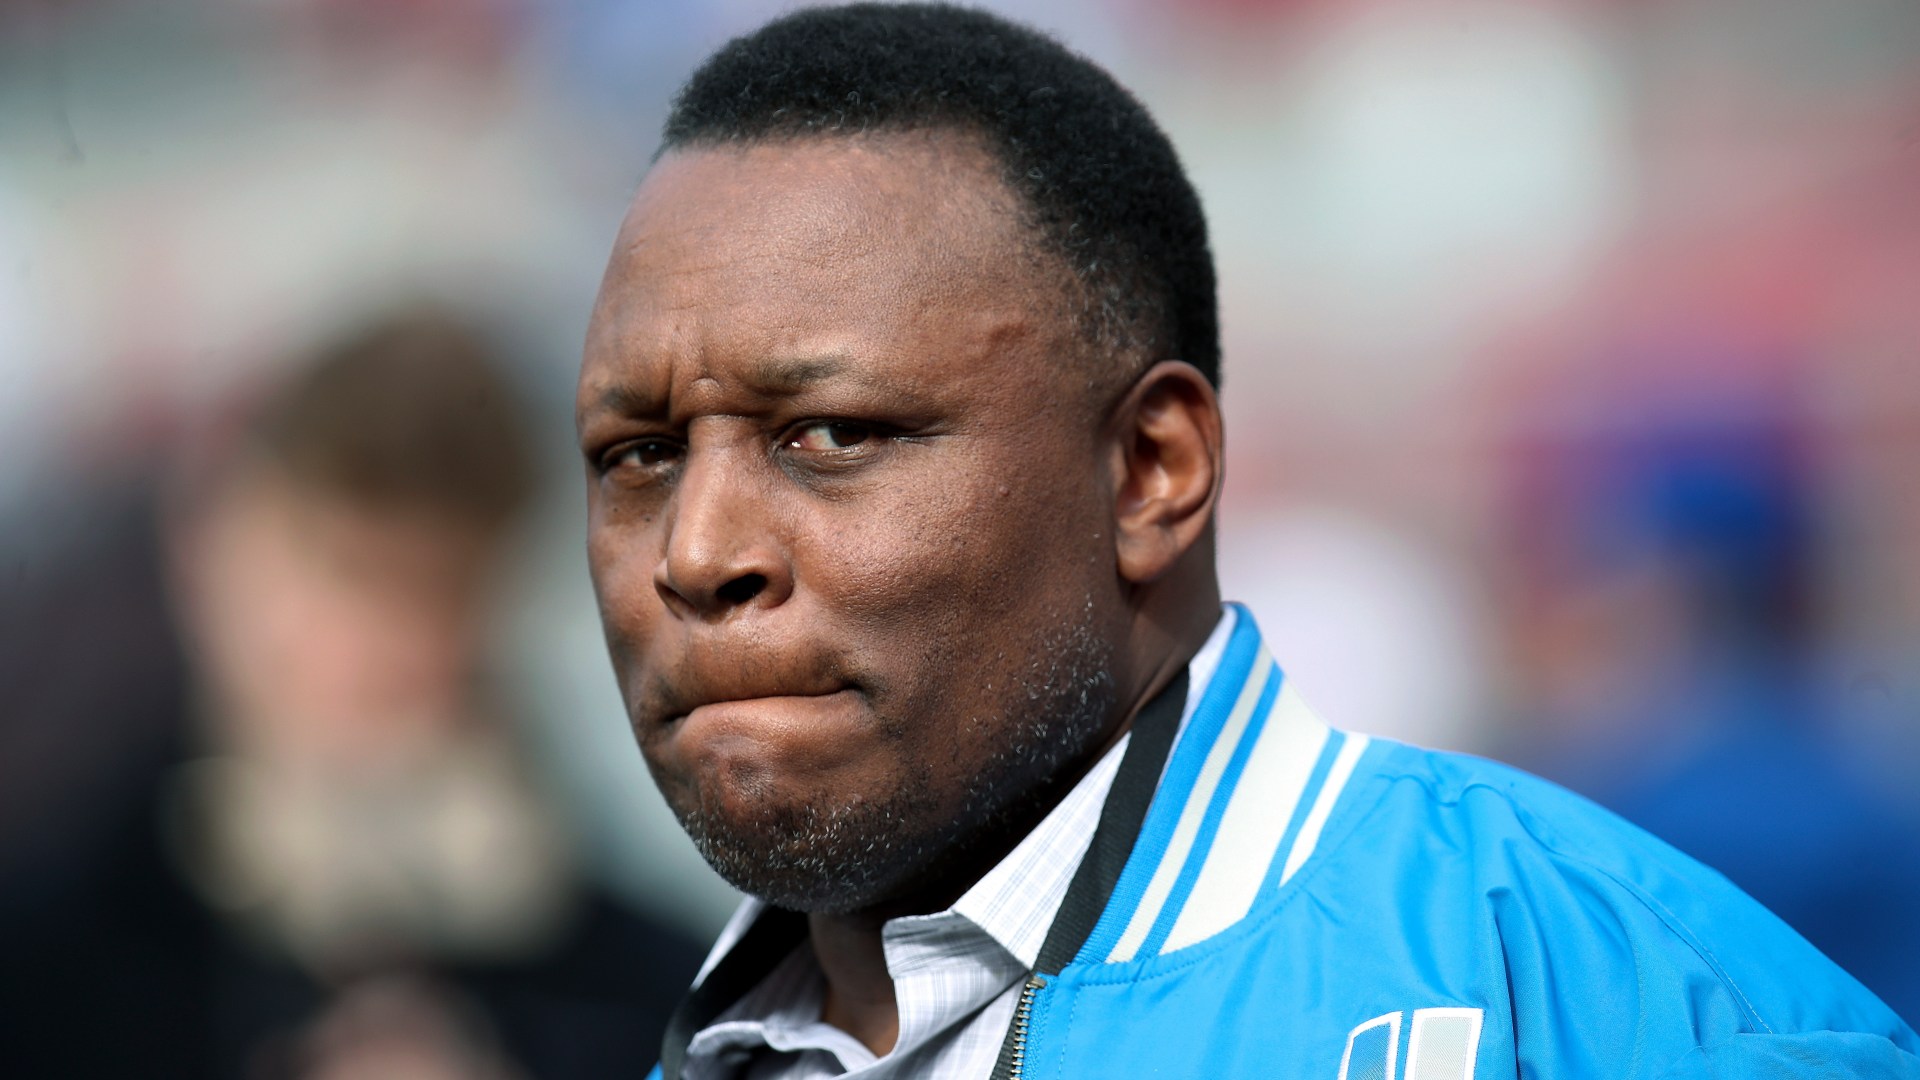 NFL icon Barry Sanders reveals heart-related health scare after taking ‘unexpected’ turn on Father’s Day weekend [Video]